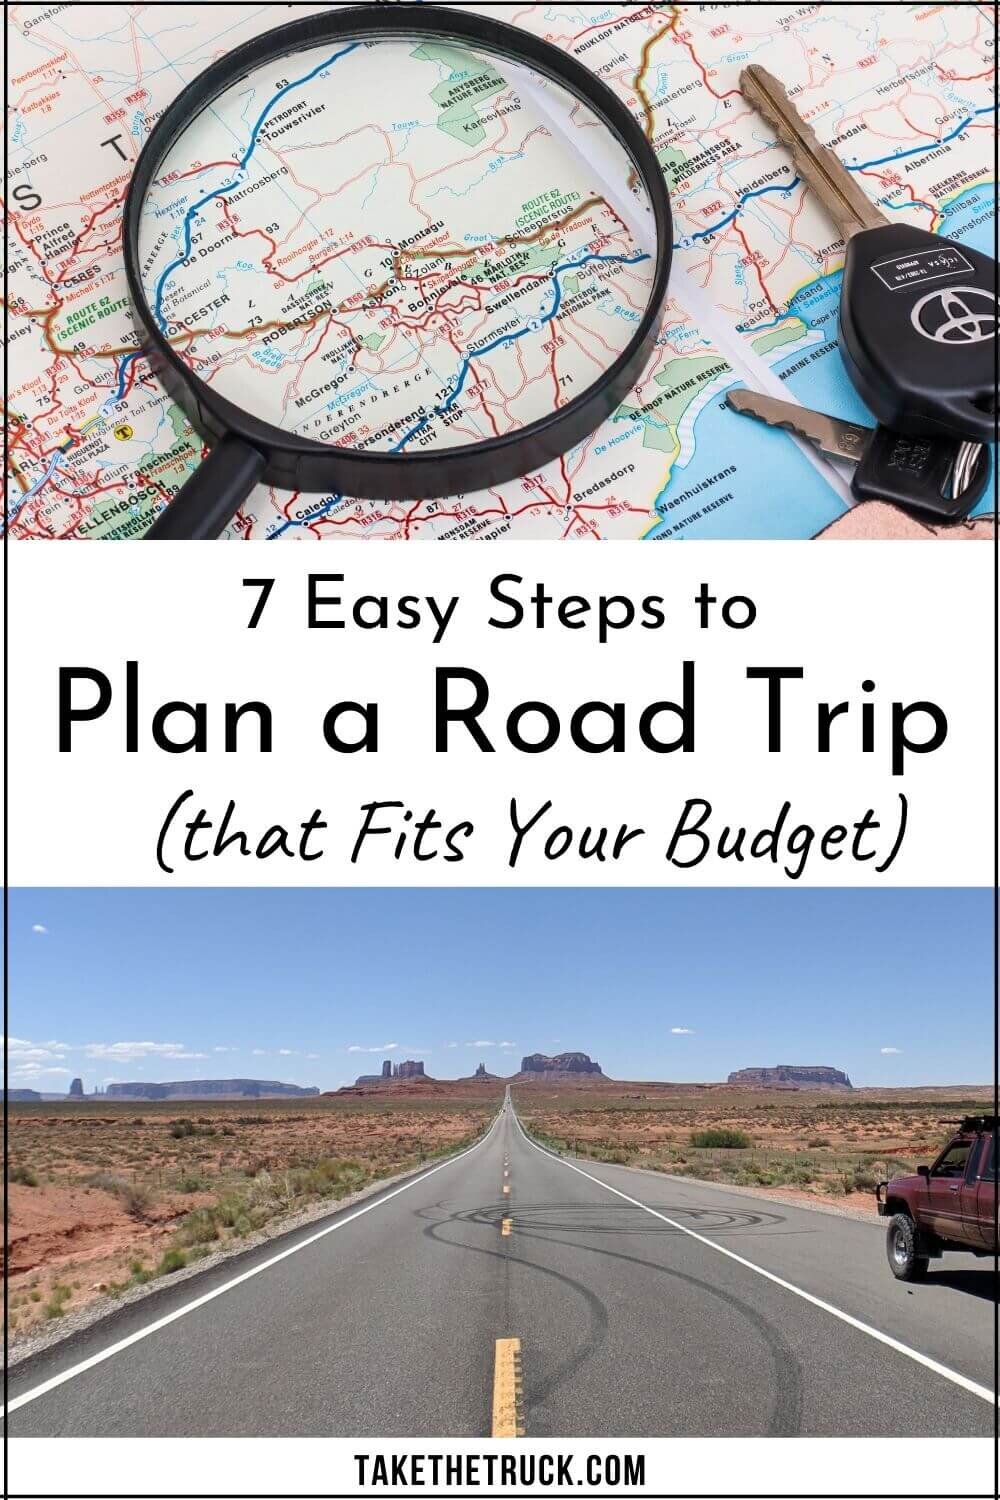 Read this post to figure out how to plan a road trip on a budget. From dreaming to realistic planning based on your individual budget, we’ll help you finally plan and take that road trip!